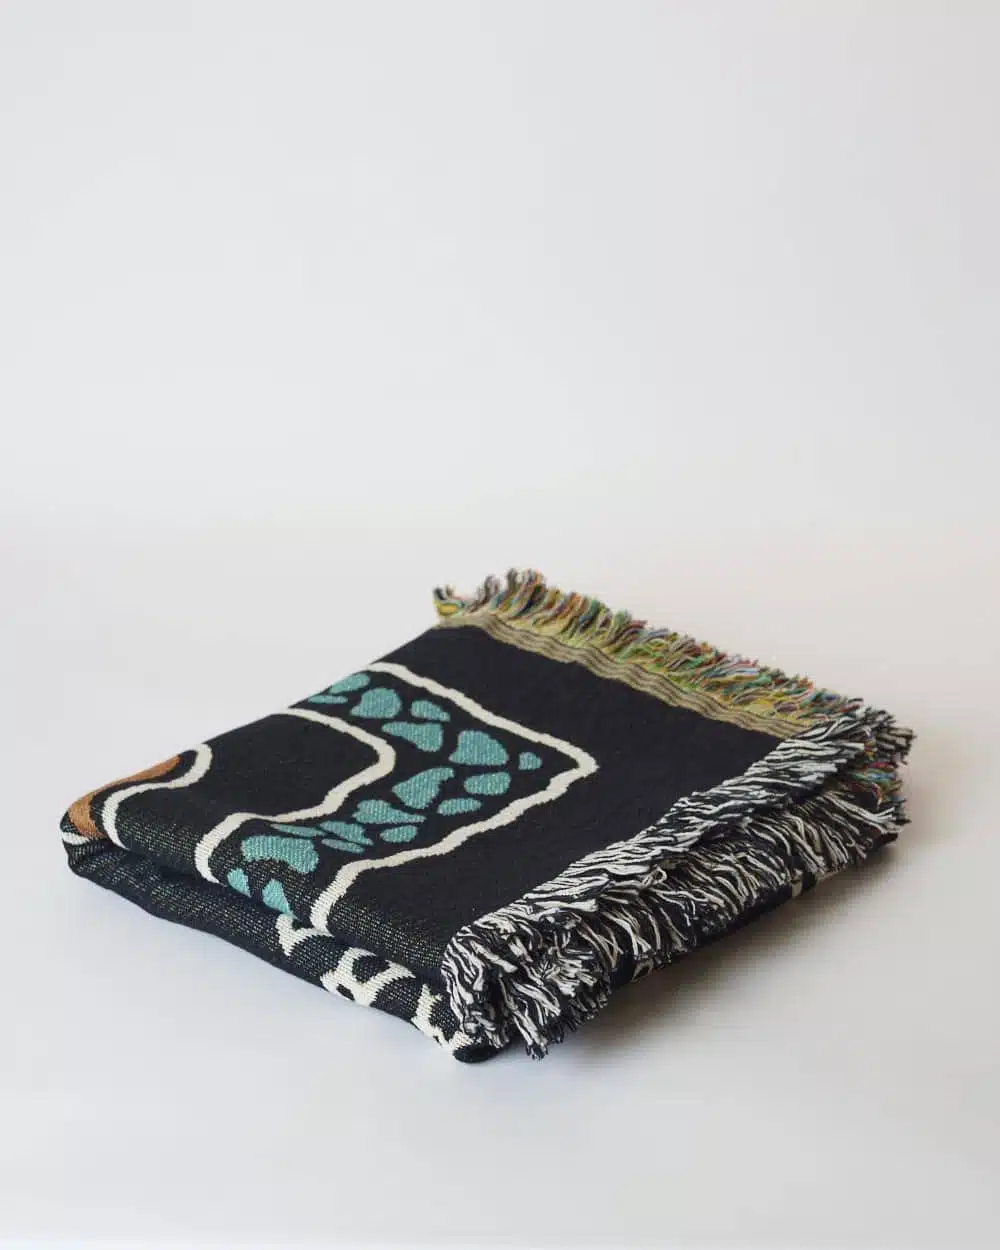 Red Rabbit Trading Co. Turquoise Eagle Blanket